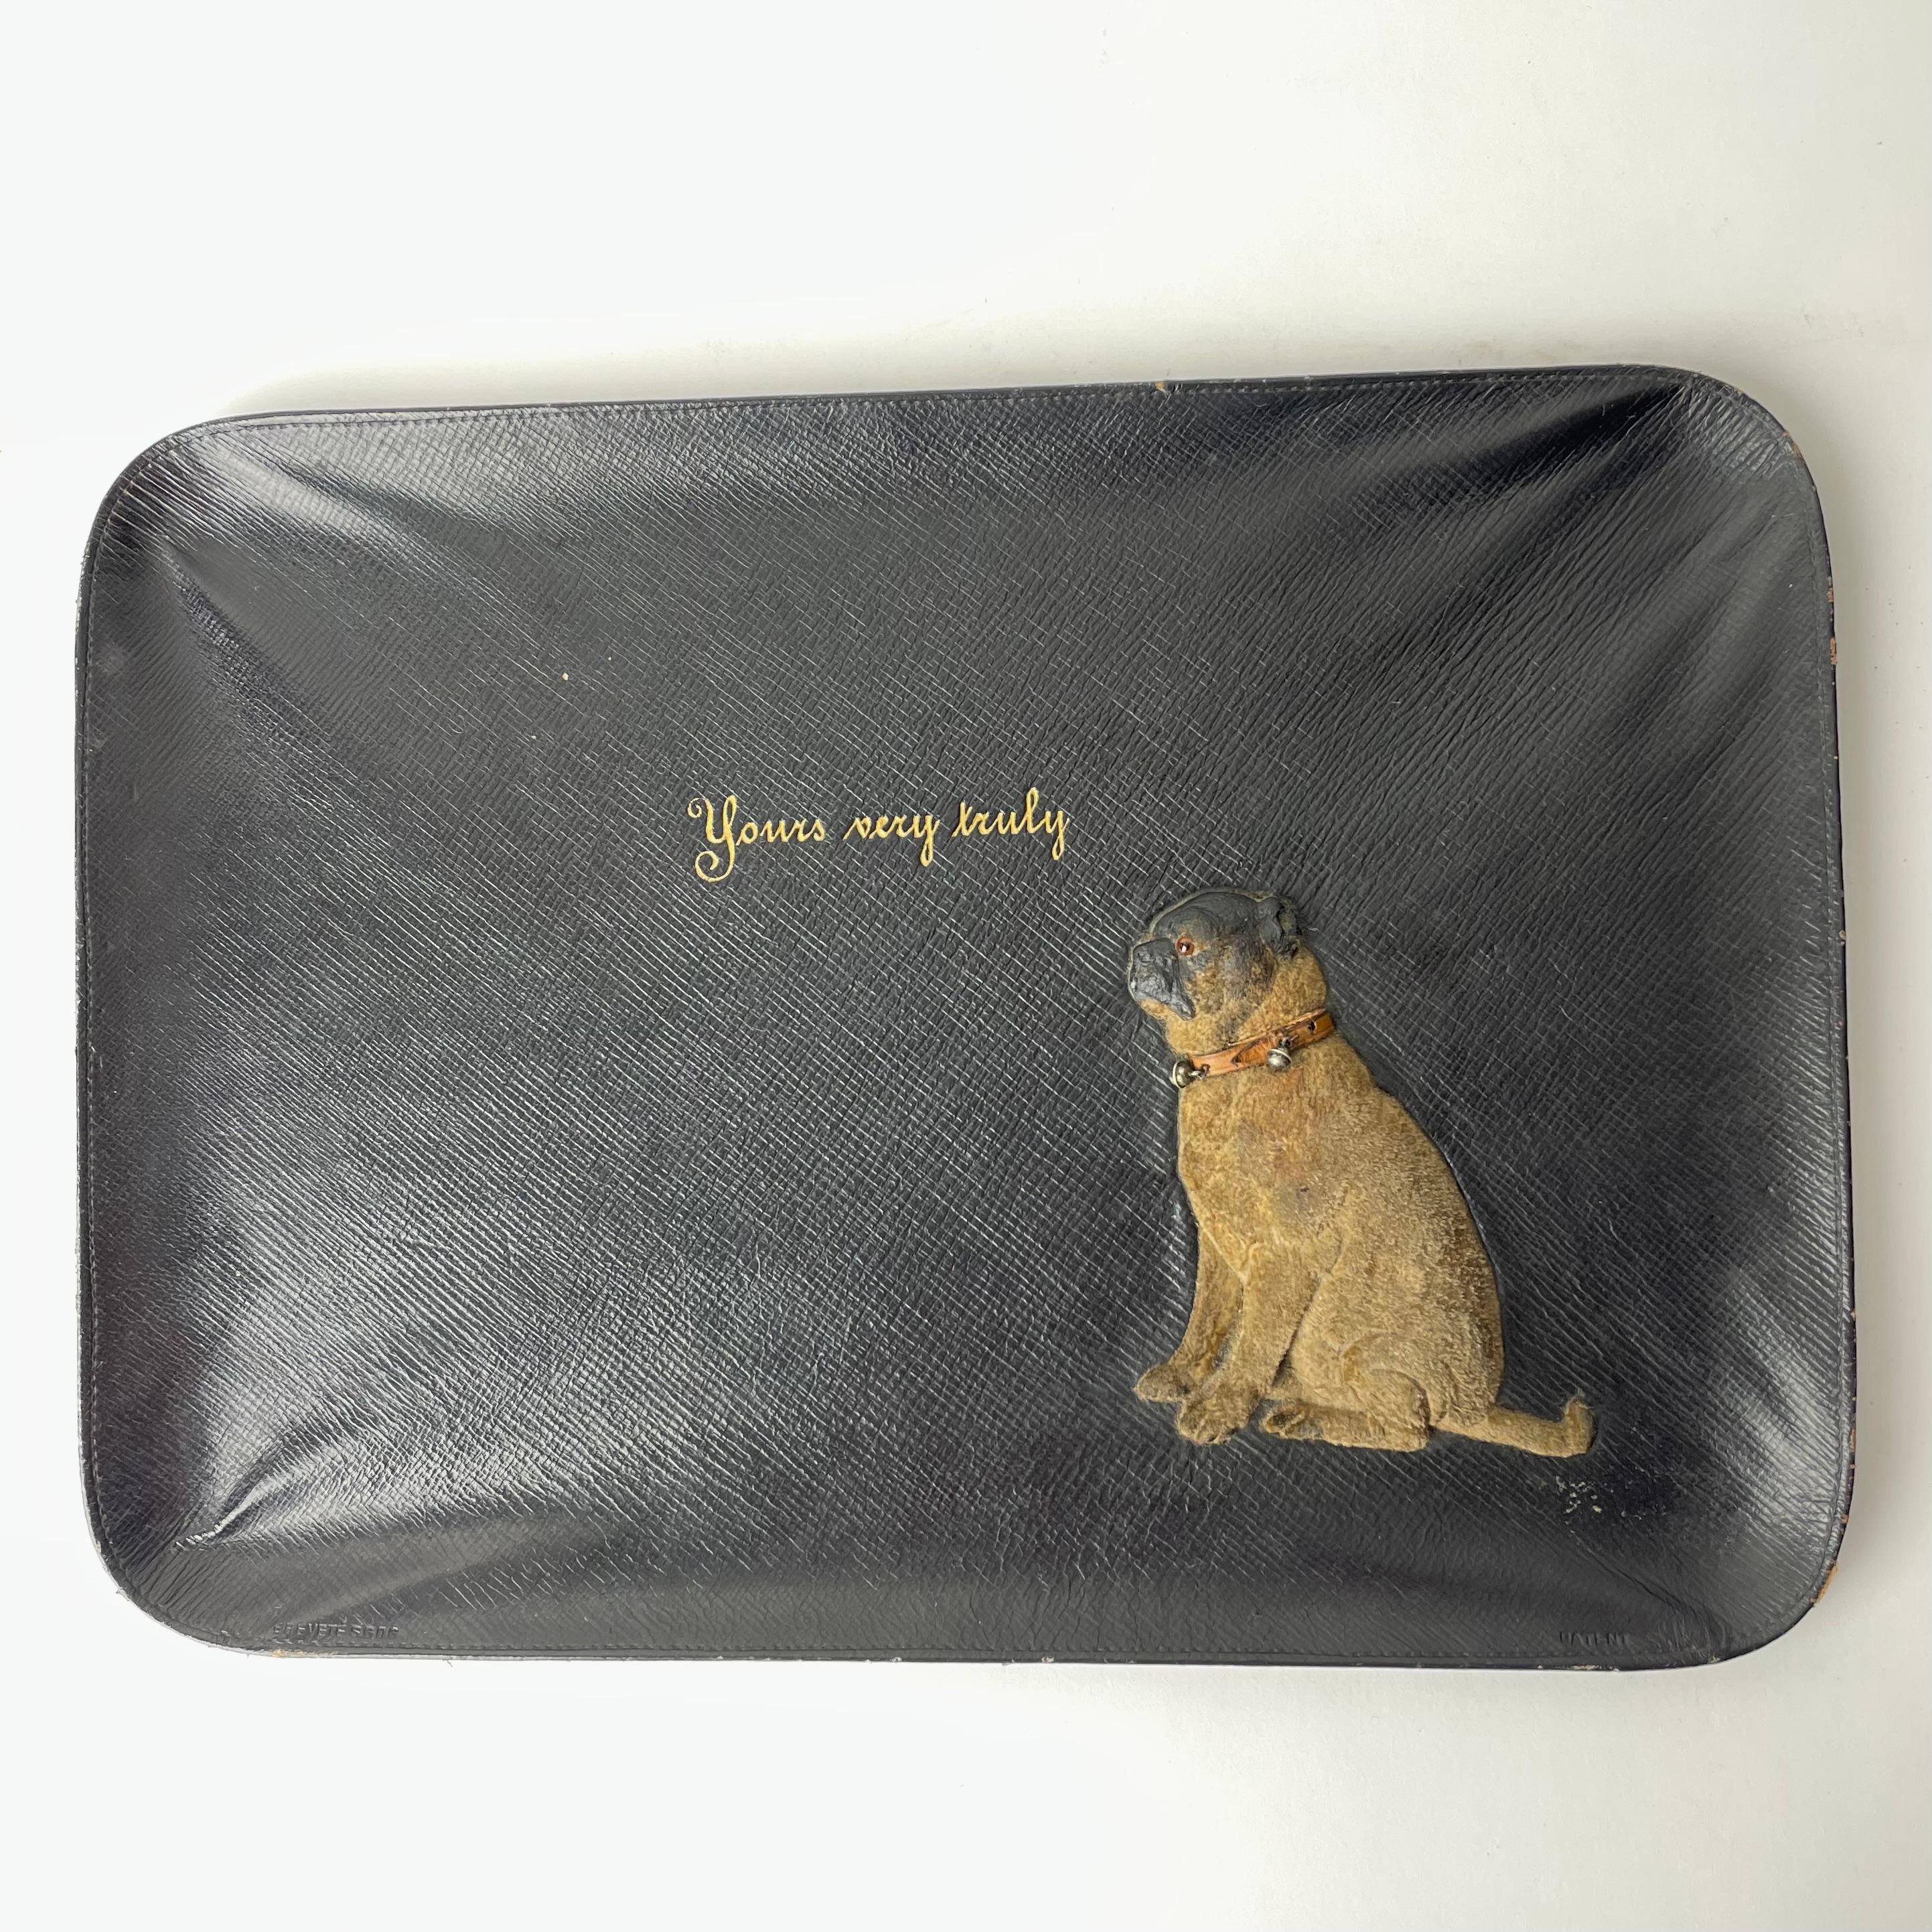 Leather-covered Desk Dish with charming dog from the early 20th Century. Made in Austria by J. Weidman K.K. Hoffabrikant in Wienna. The charming dog with bells in the collar.

Wear consistent with age and use. See photos.